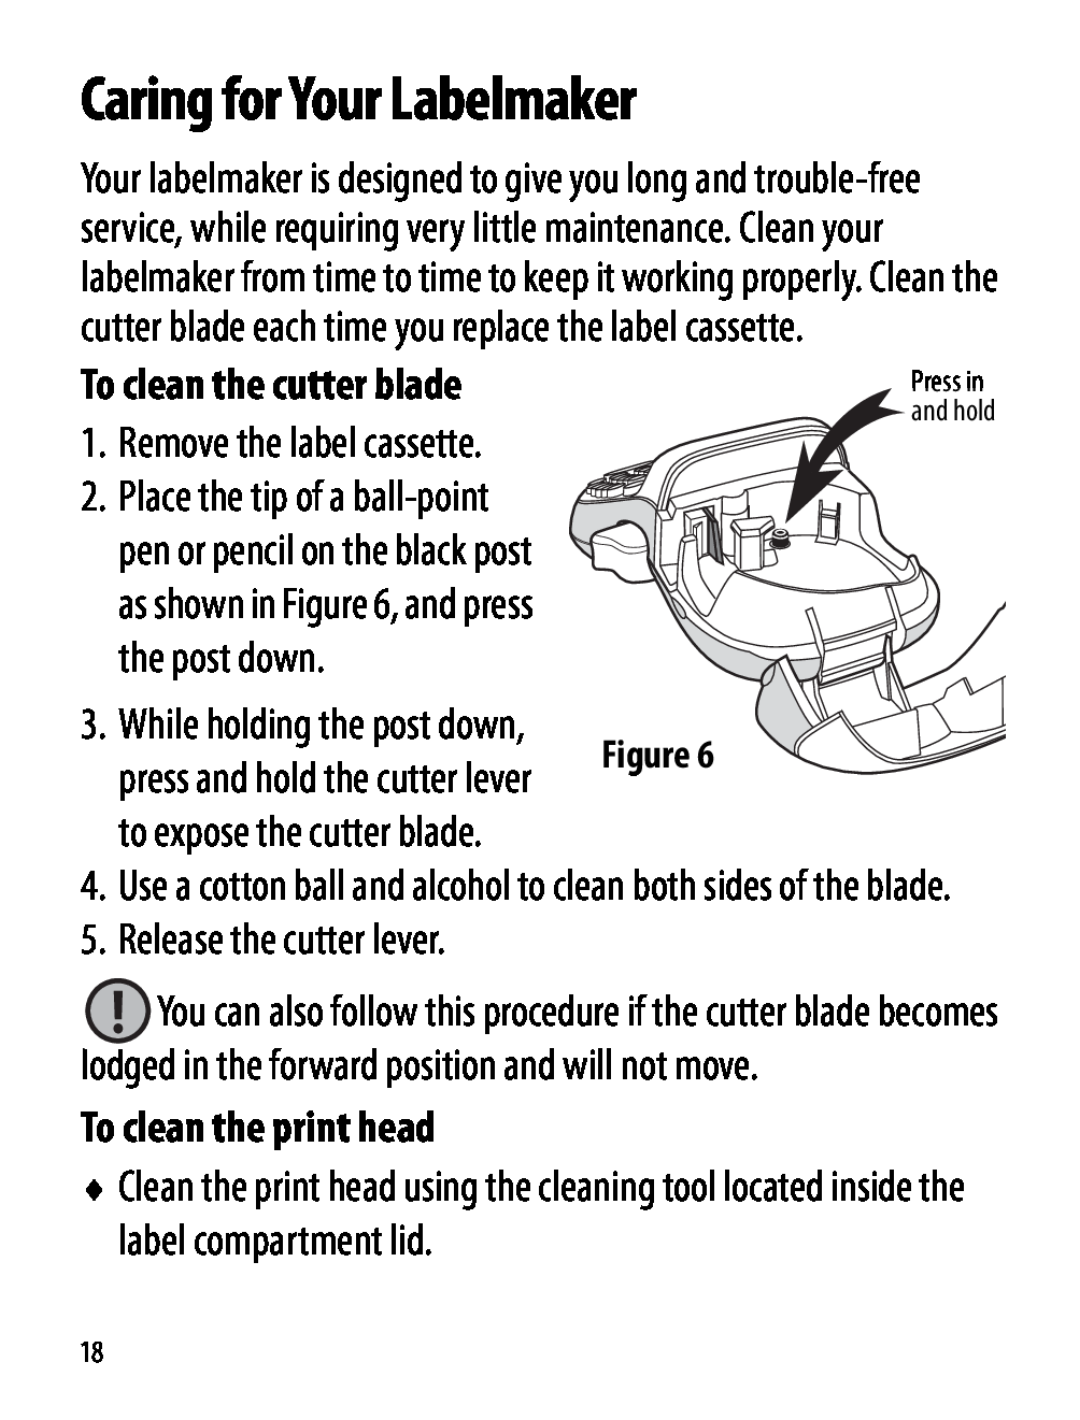 Dymo manual Caring for Your Labelmaker, To clean the cutter blade, Remove the label cassette, Release the cutter lever 